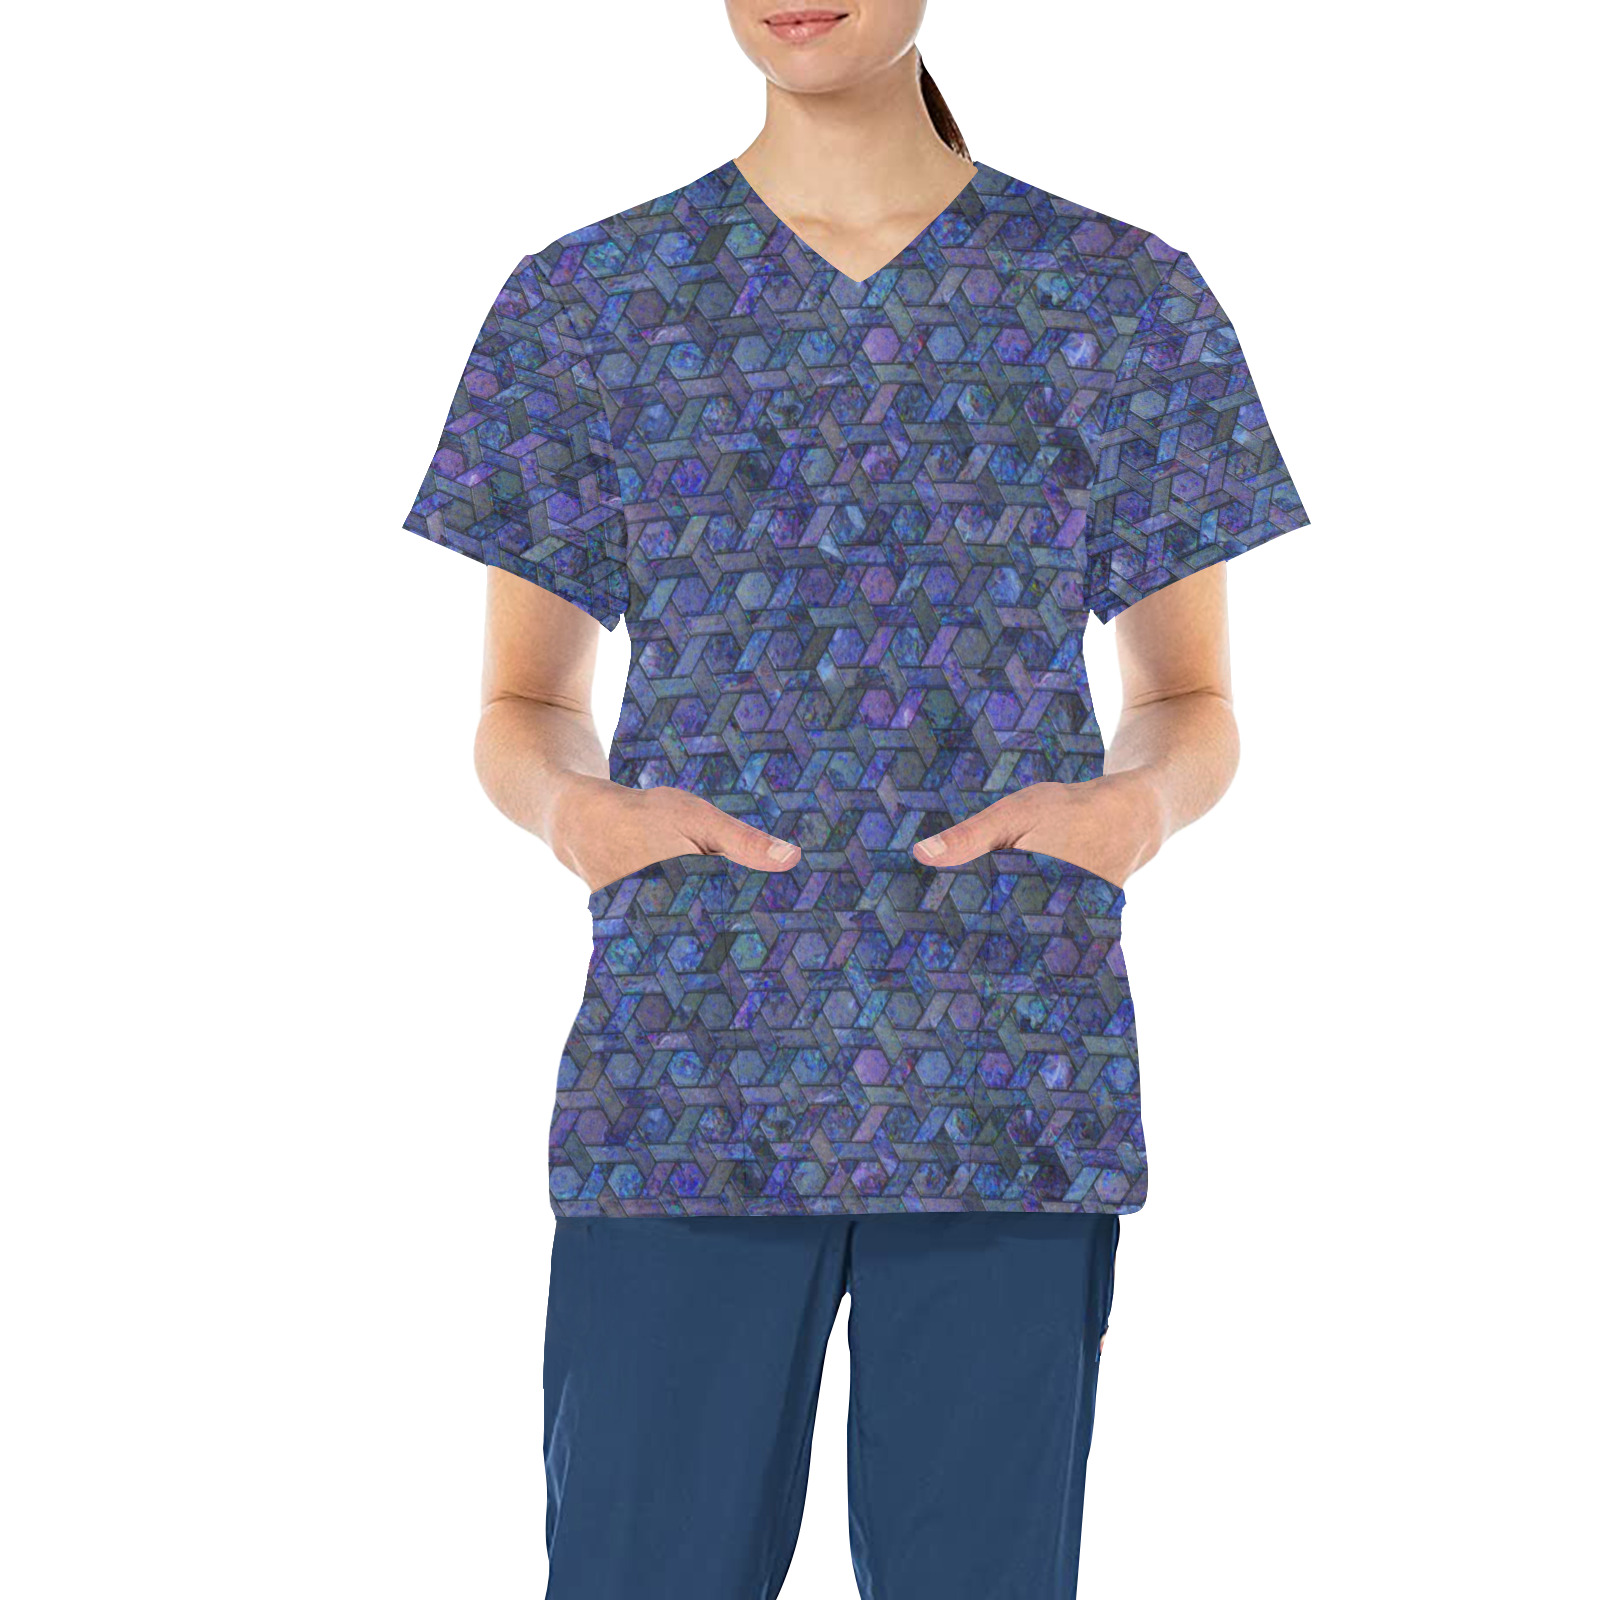 Pink and Purple Tiles Geometric pattern Children's Ward All Over Print Scrub Top